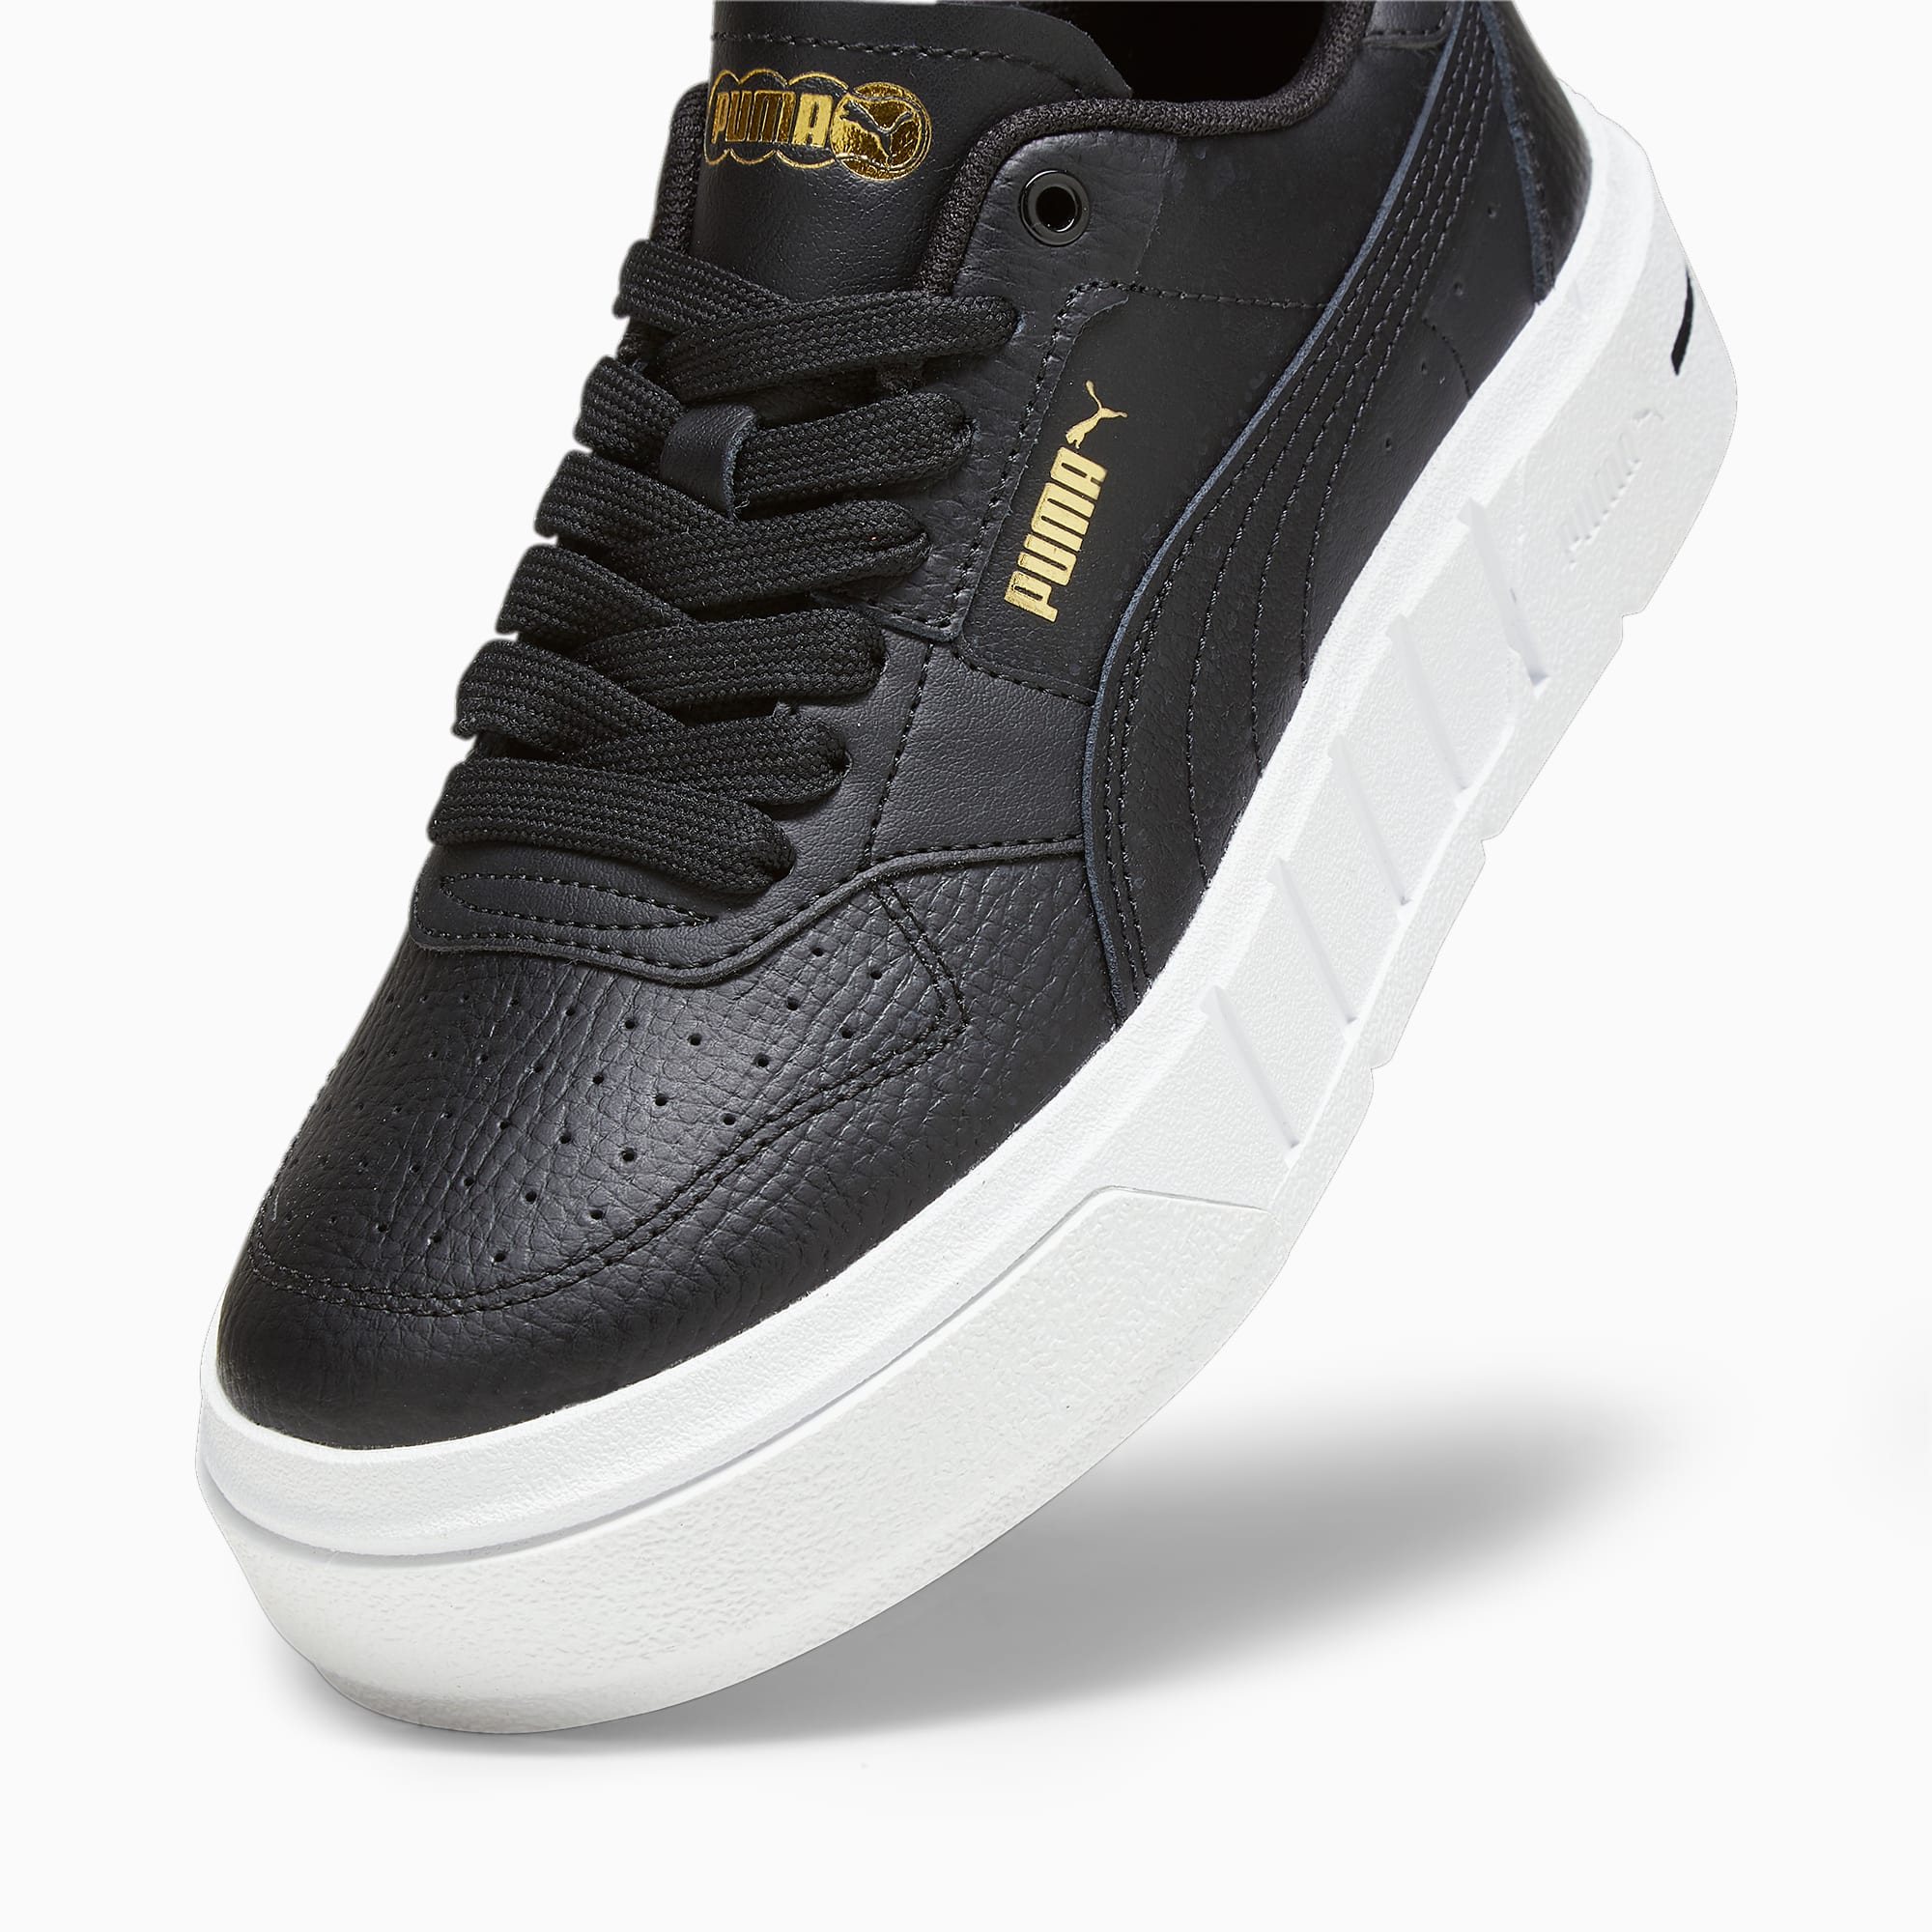 PUMA Cali Court Youth Leather Sneakers, Black/White